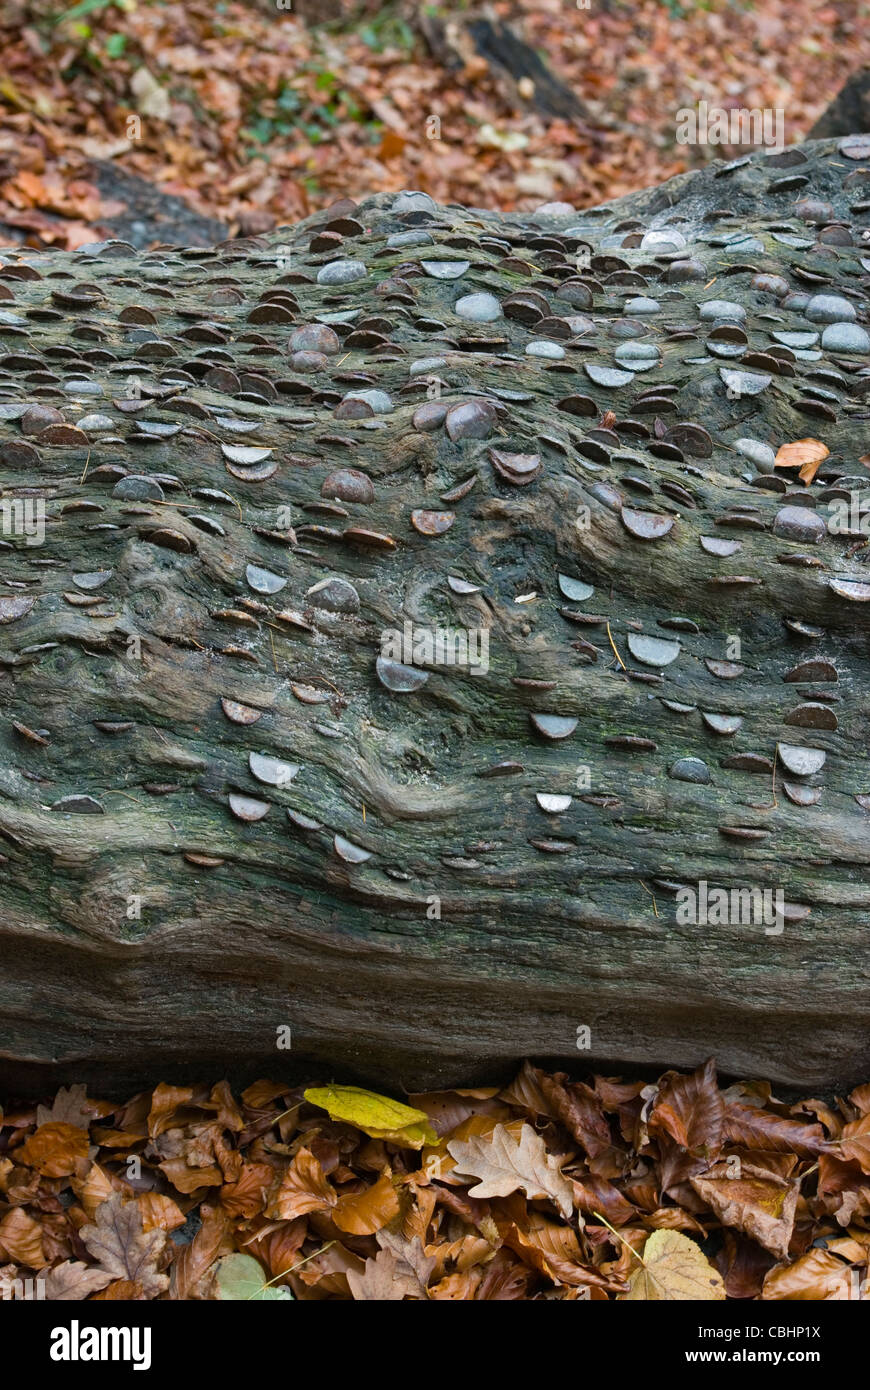 Coins in log in Strid Woods, or a 'Wish Tree' Stock Photo